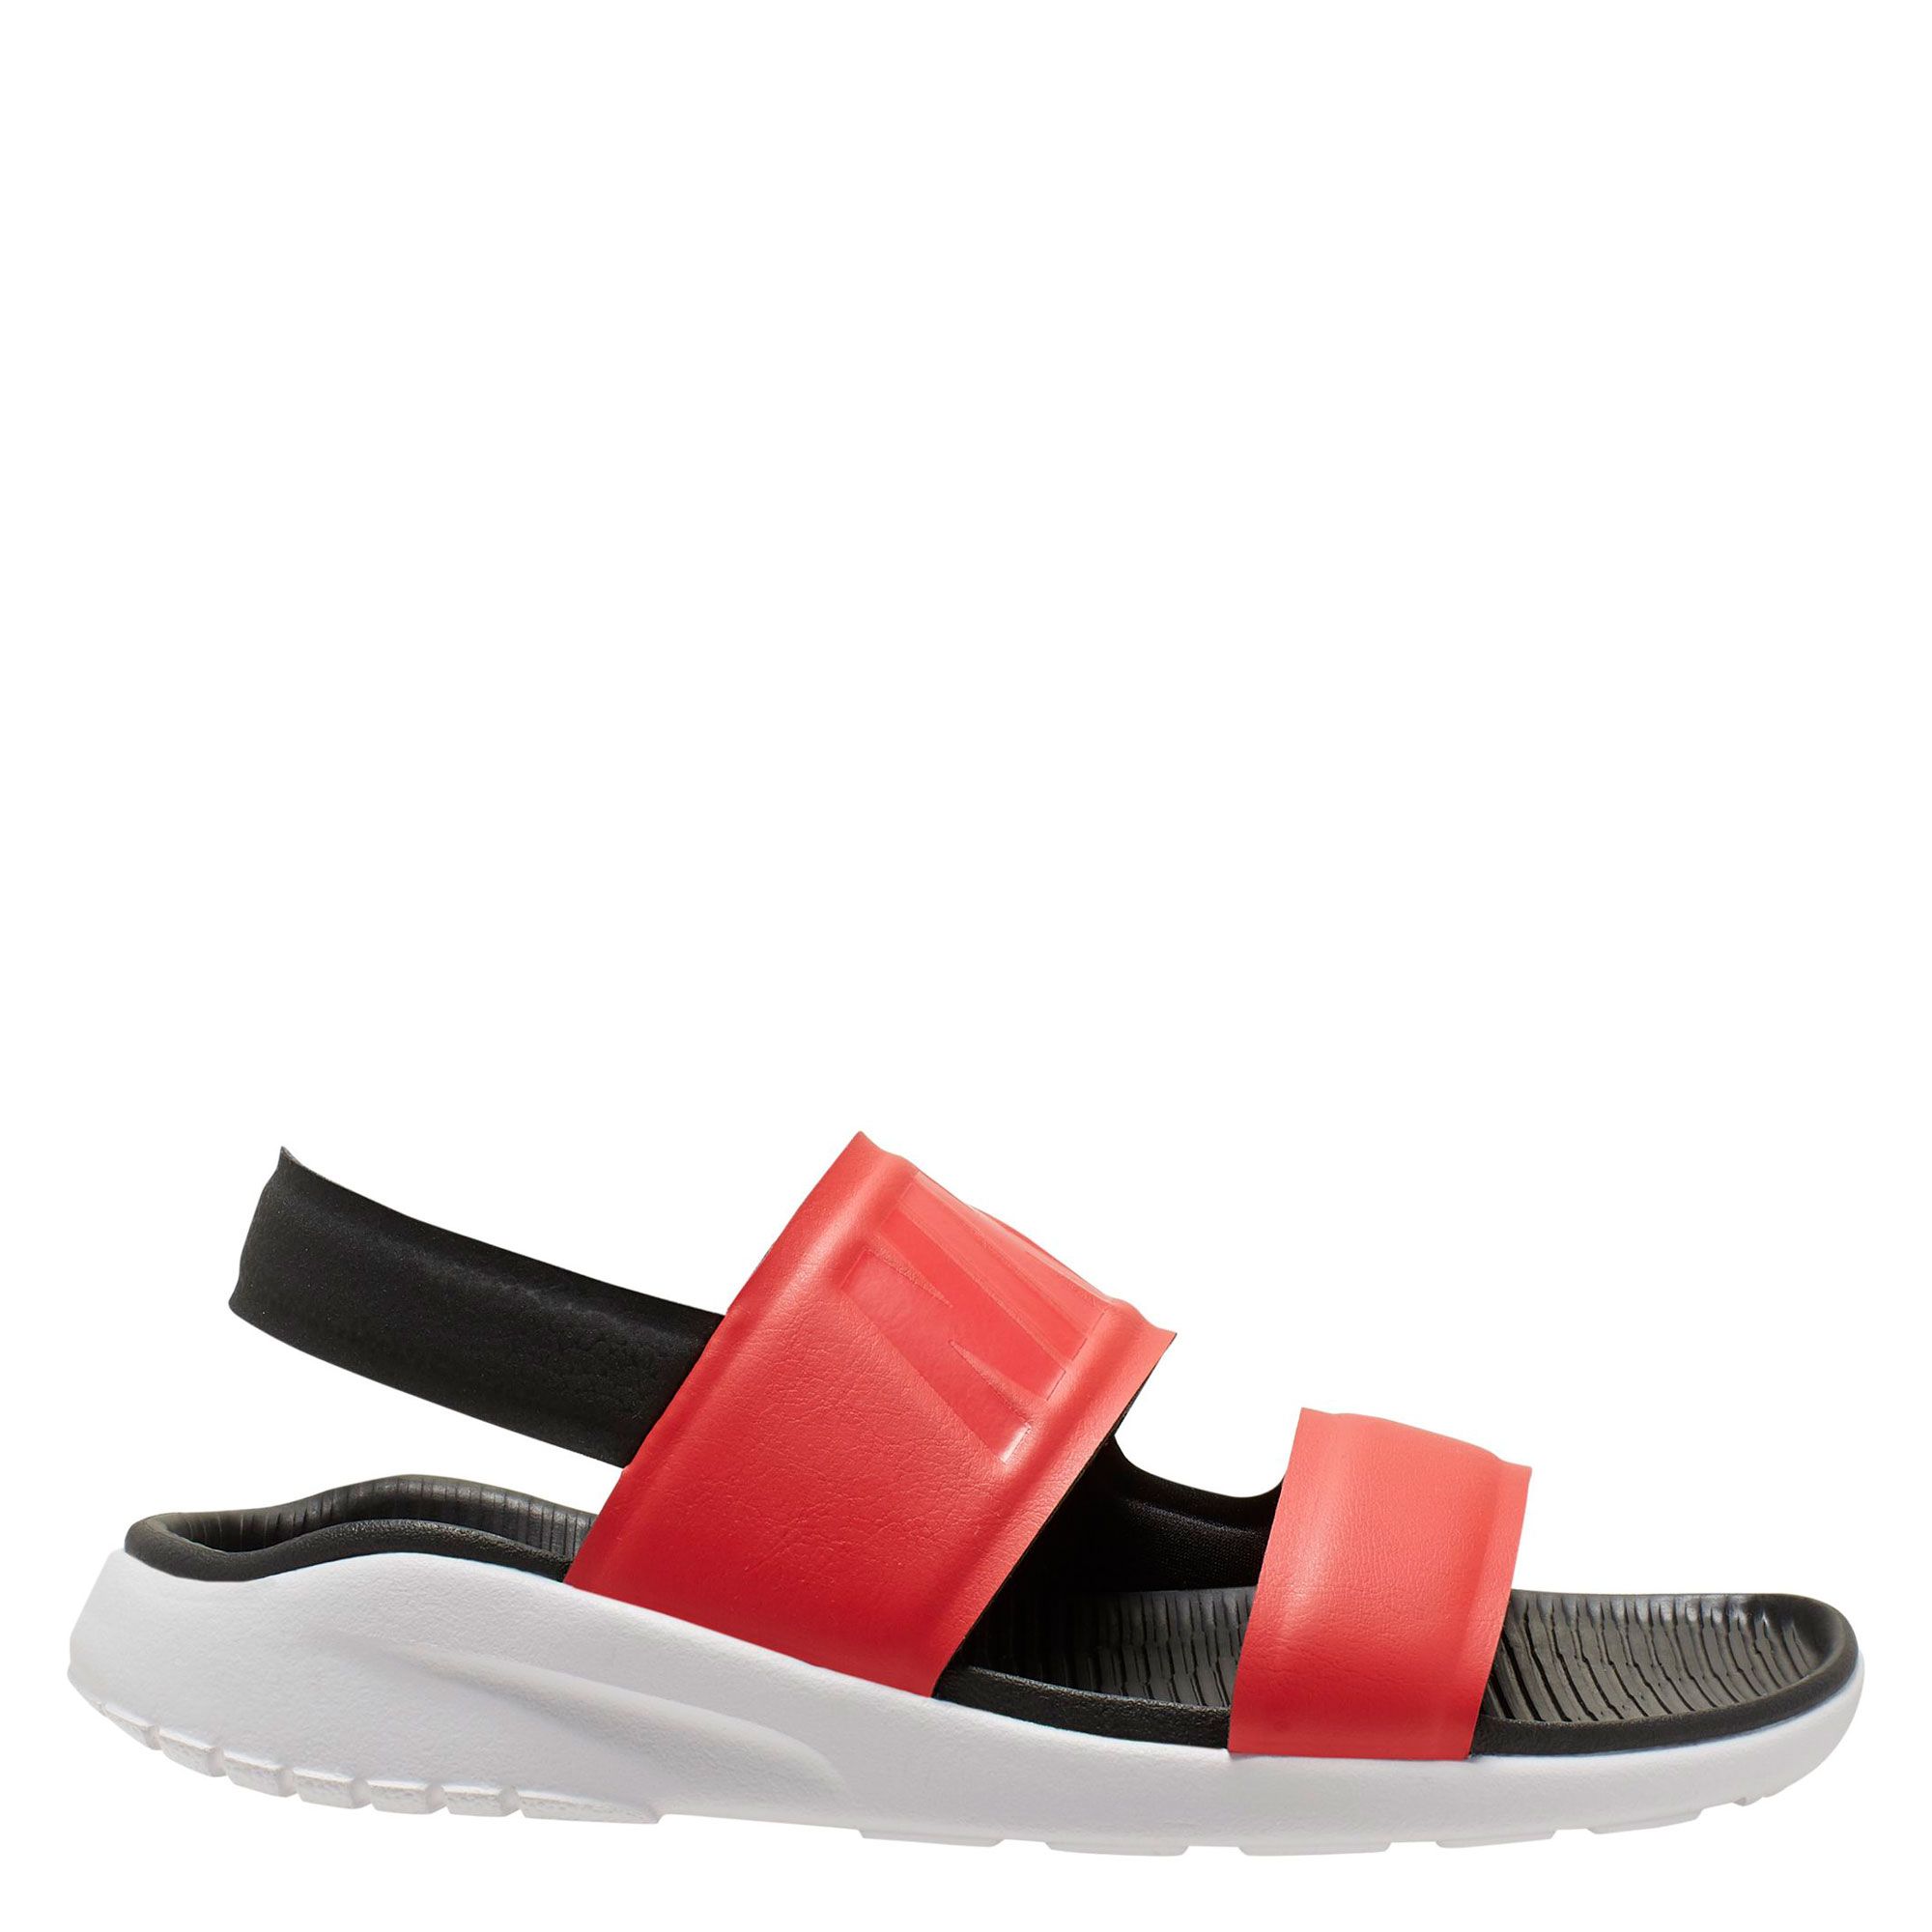 red and black sandals